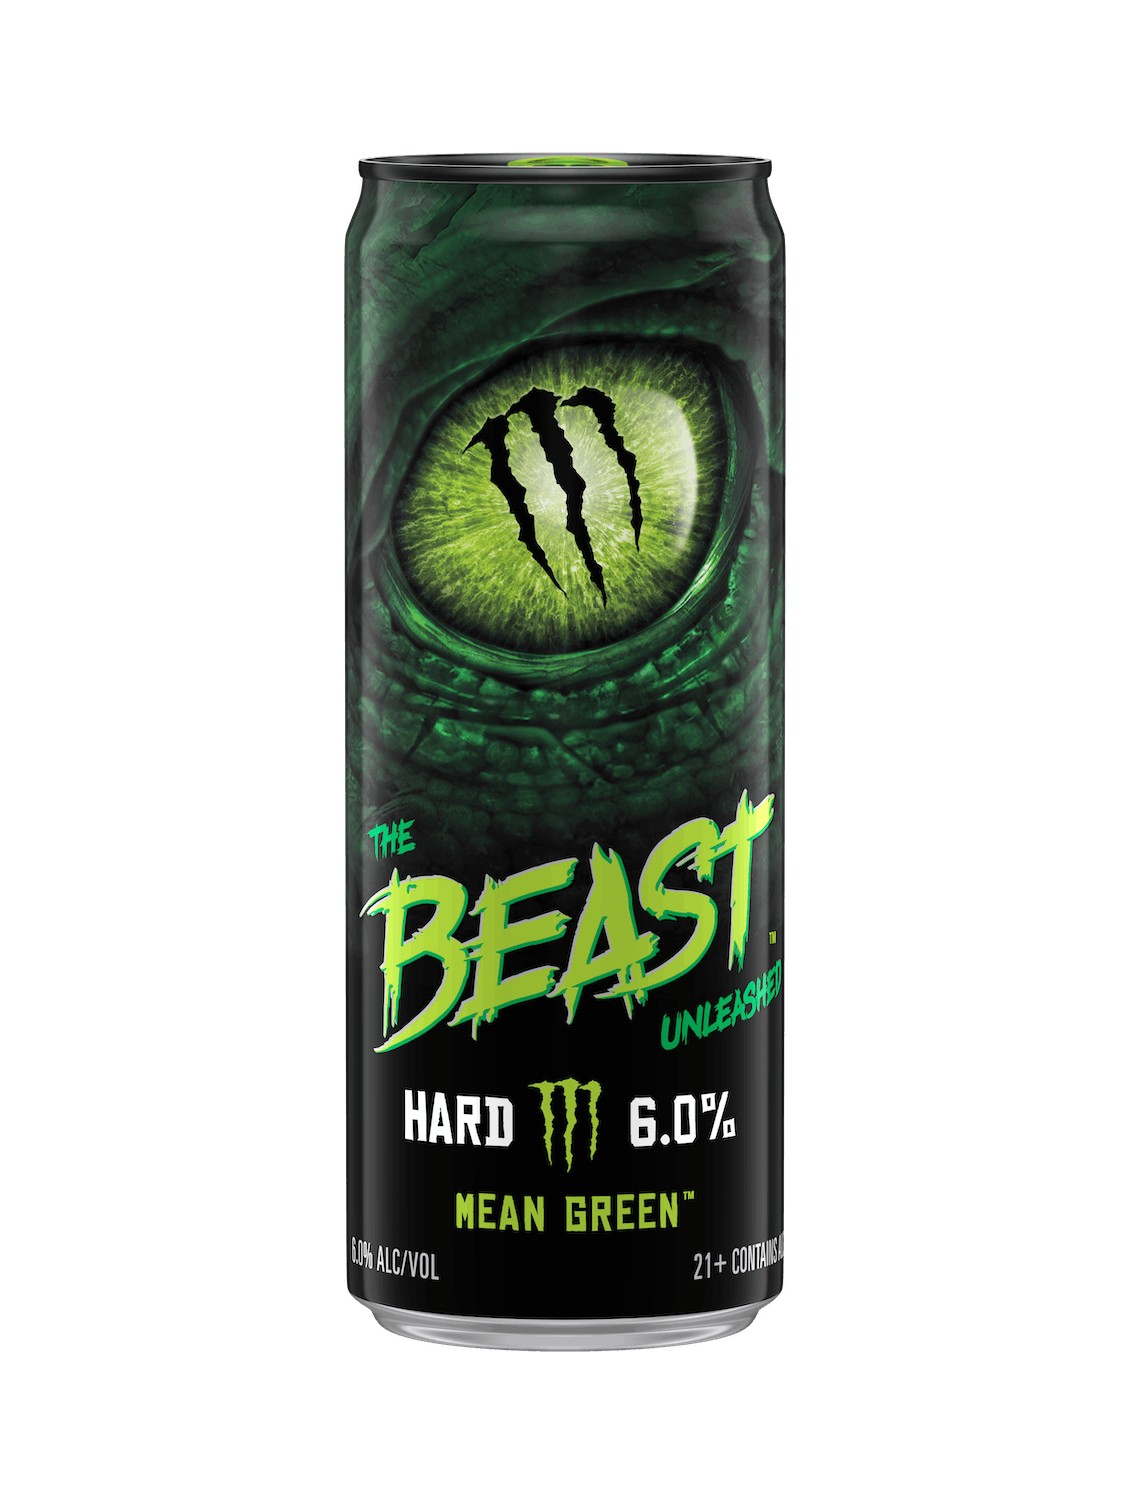 The Beast Unleashed by Monster. Mean Green